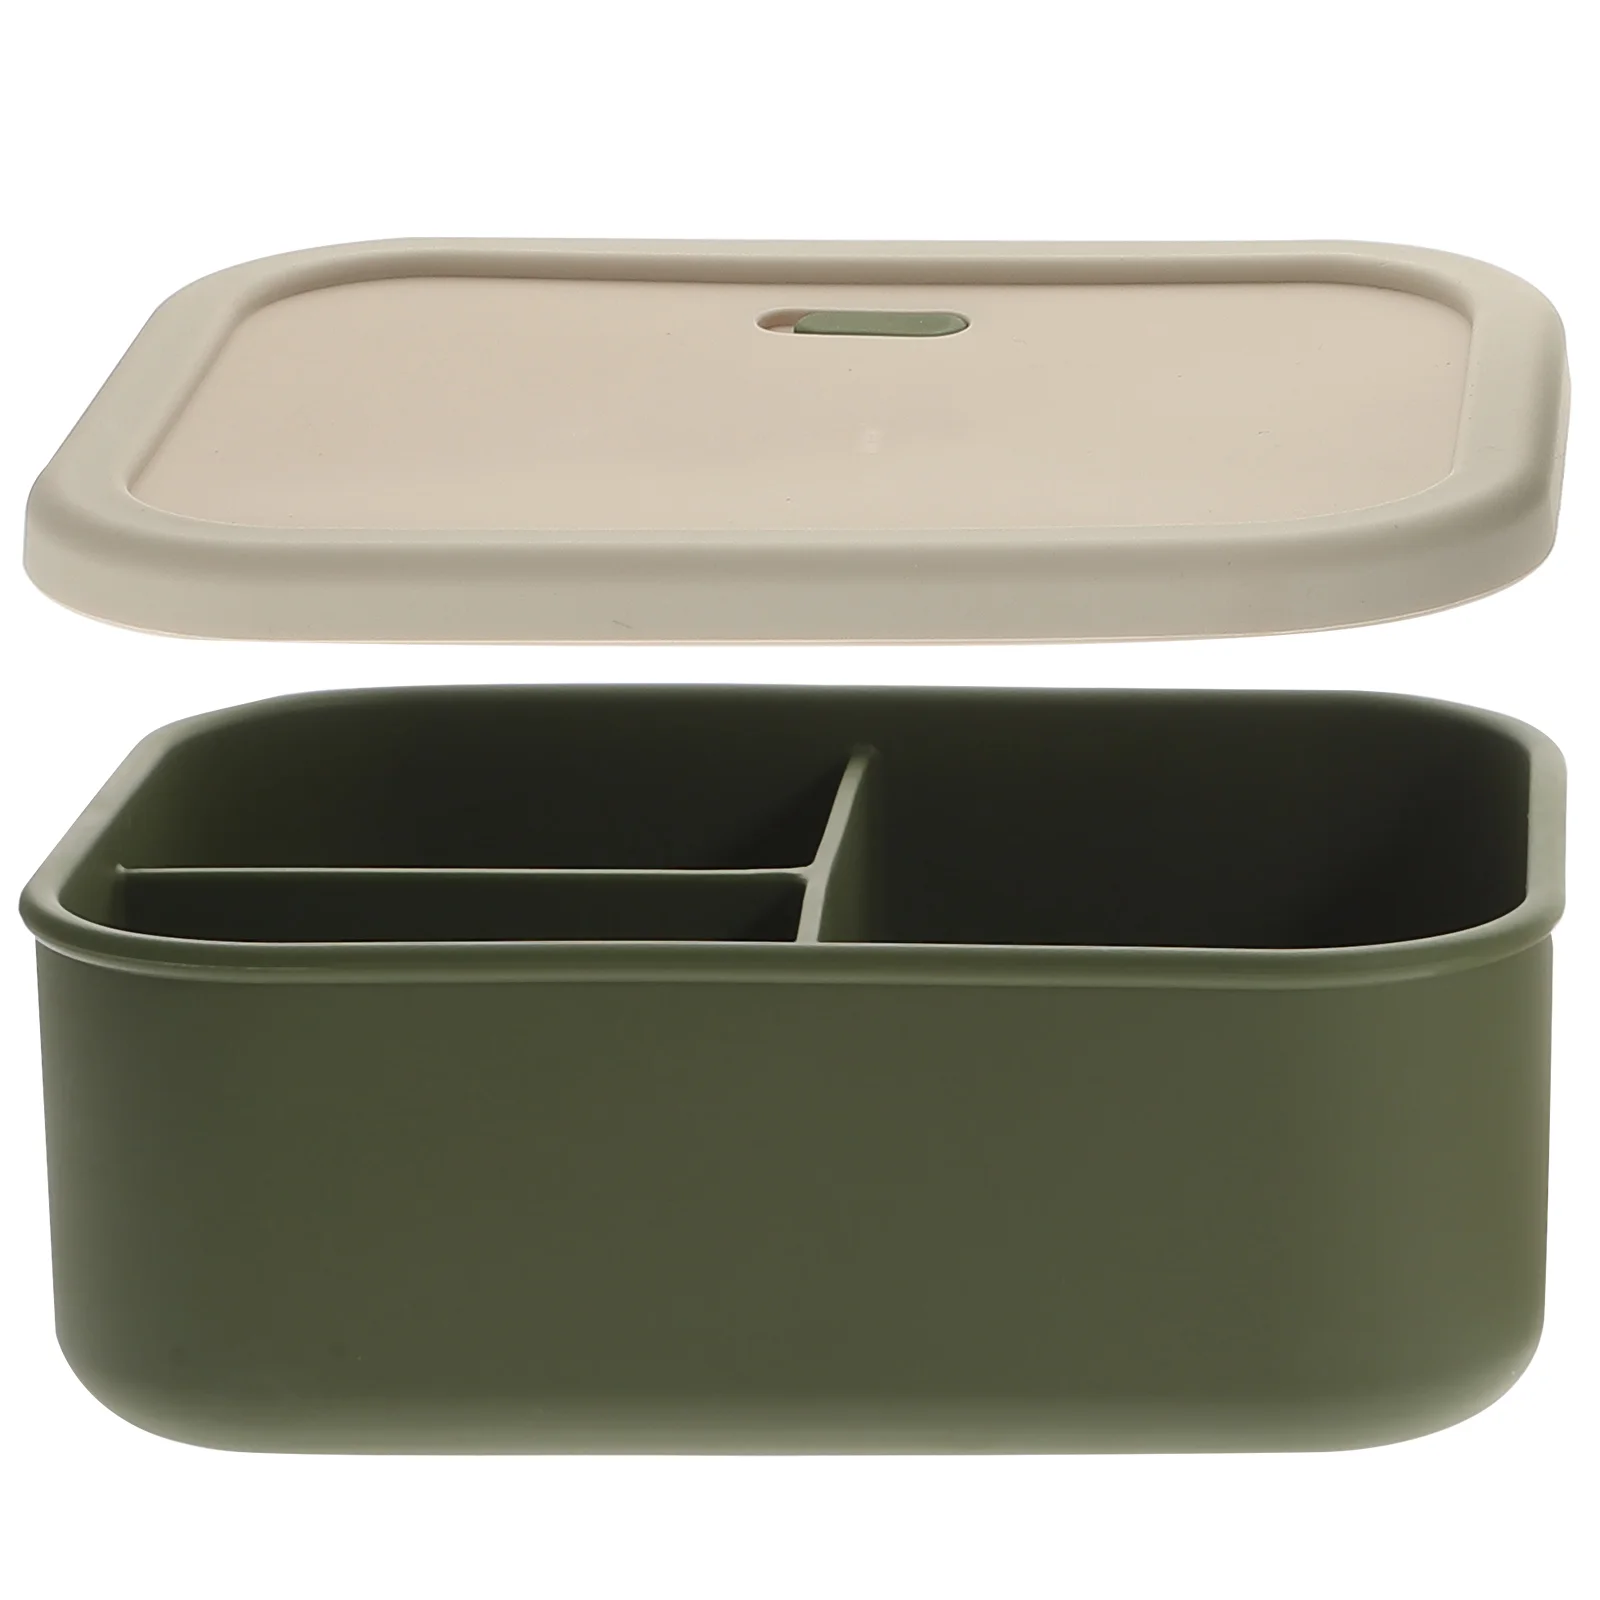 

Box Lunch Container Silicone Storage Bento Picnic Meal Containers Outdoor Microwave Sandwich Students Bowls Portable Snack